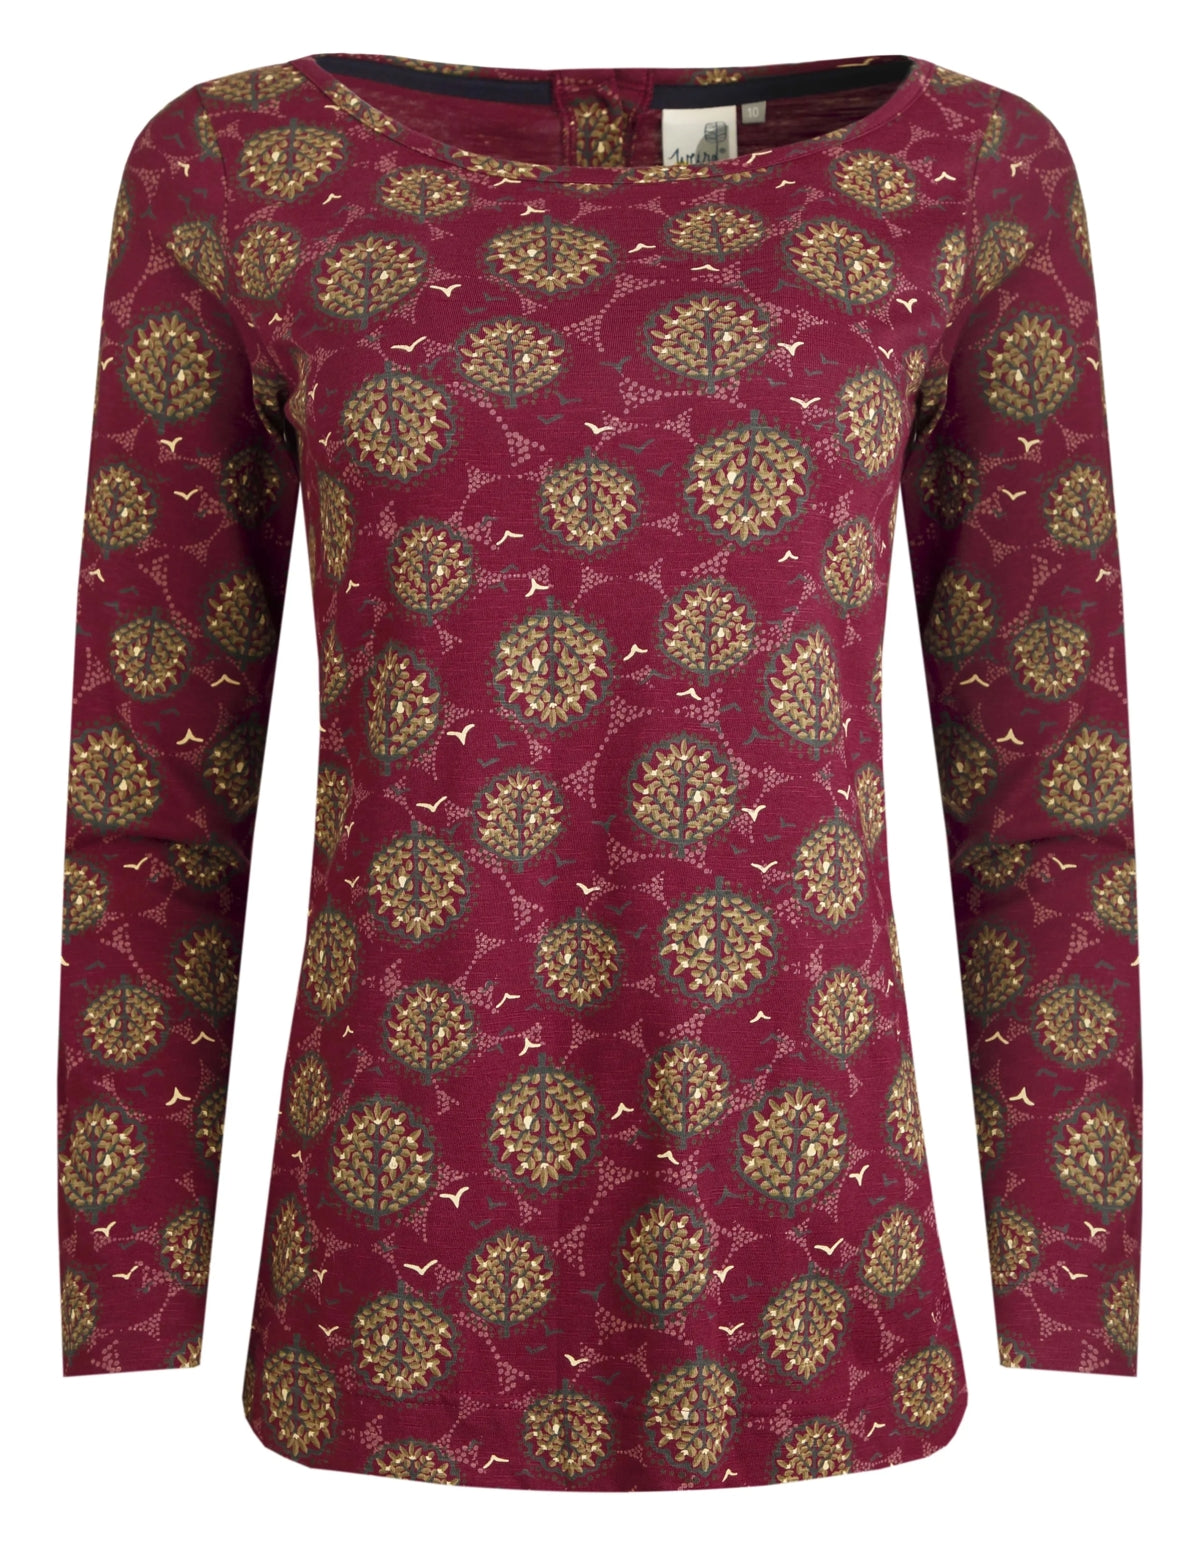 Weird Fish women's Tupelo long sleeve tee in Mulled Wine with abstract floral pattern.